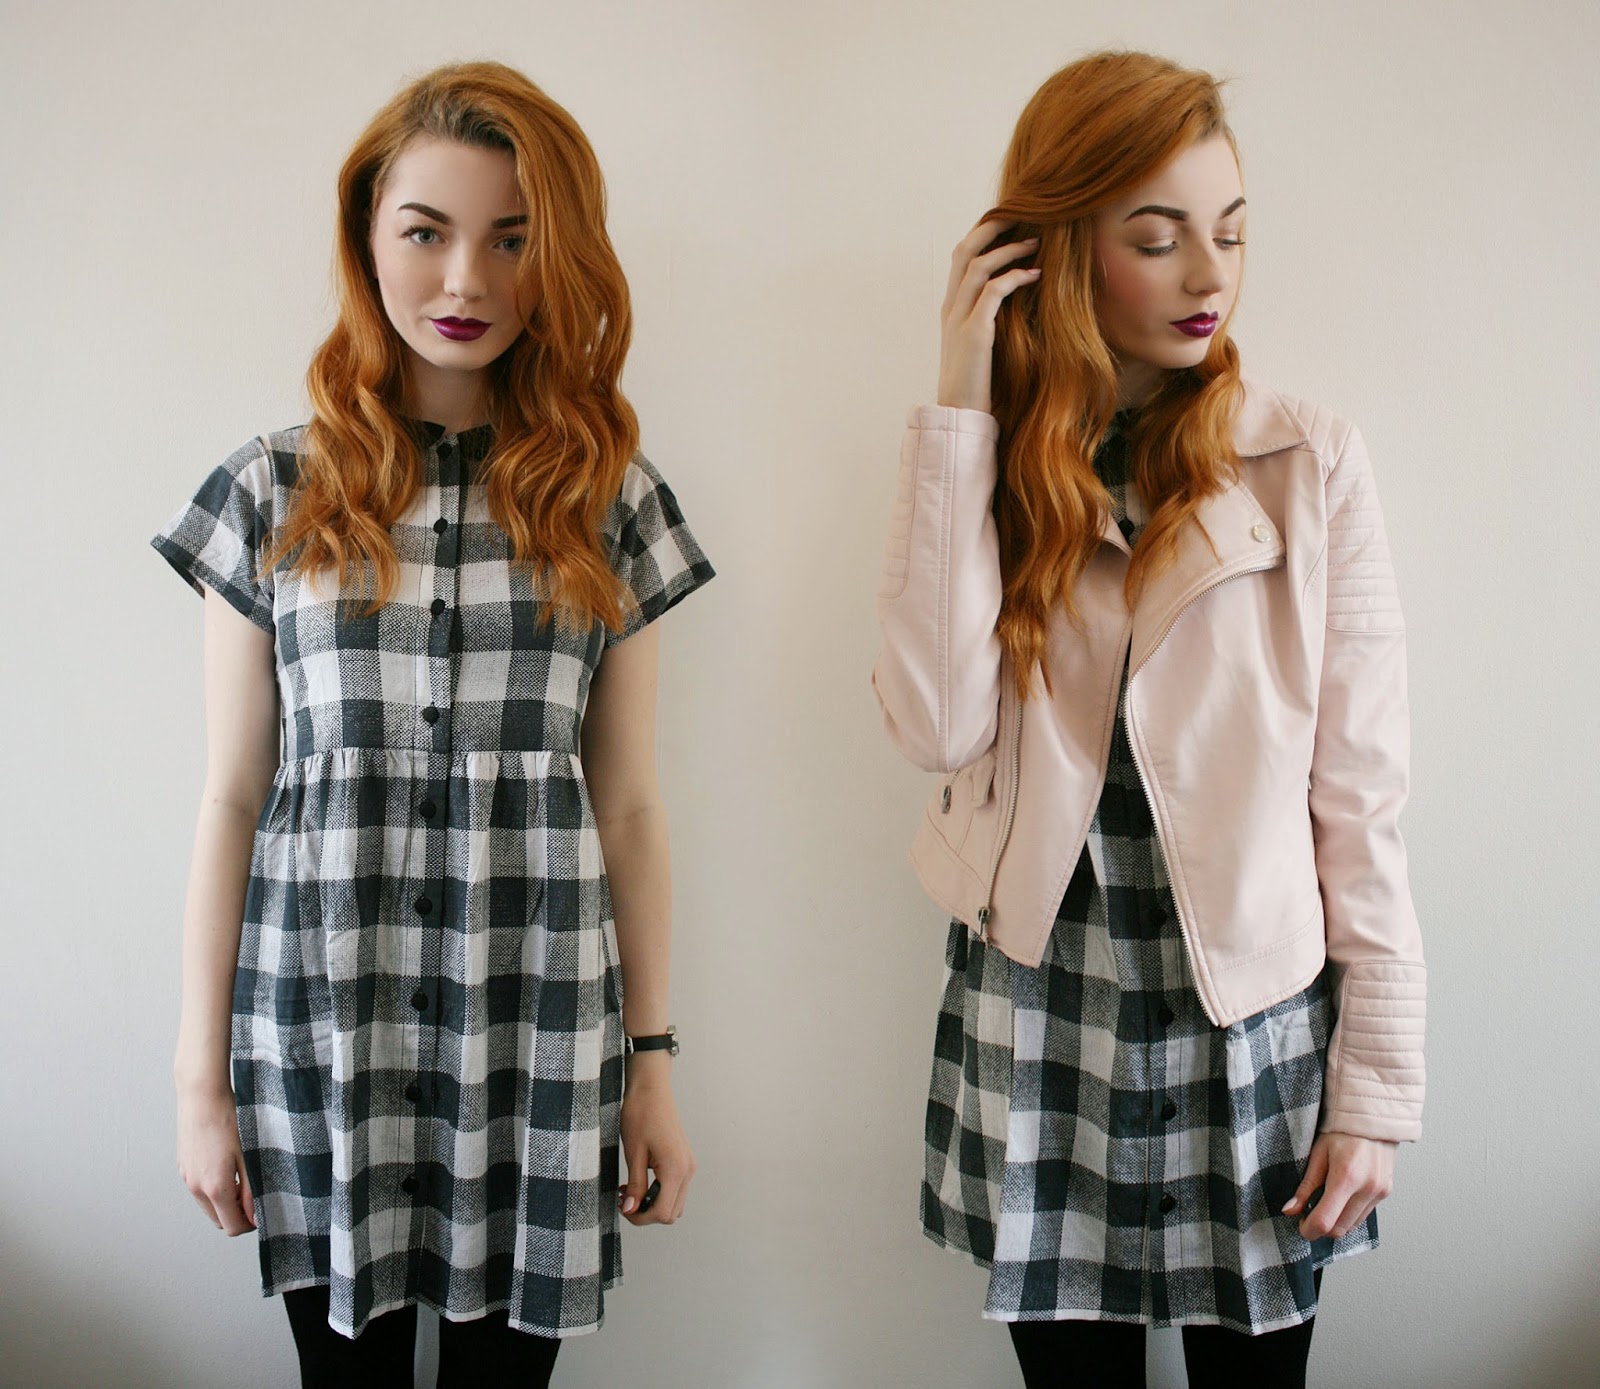 Outfit Of The Day | Gingham Dress – #MotelMonday giveaway!